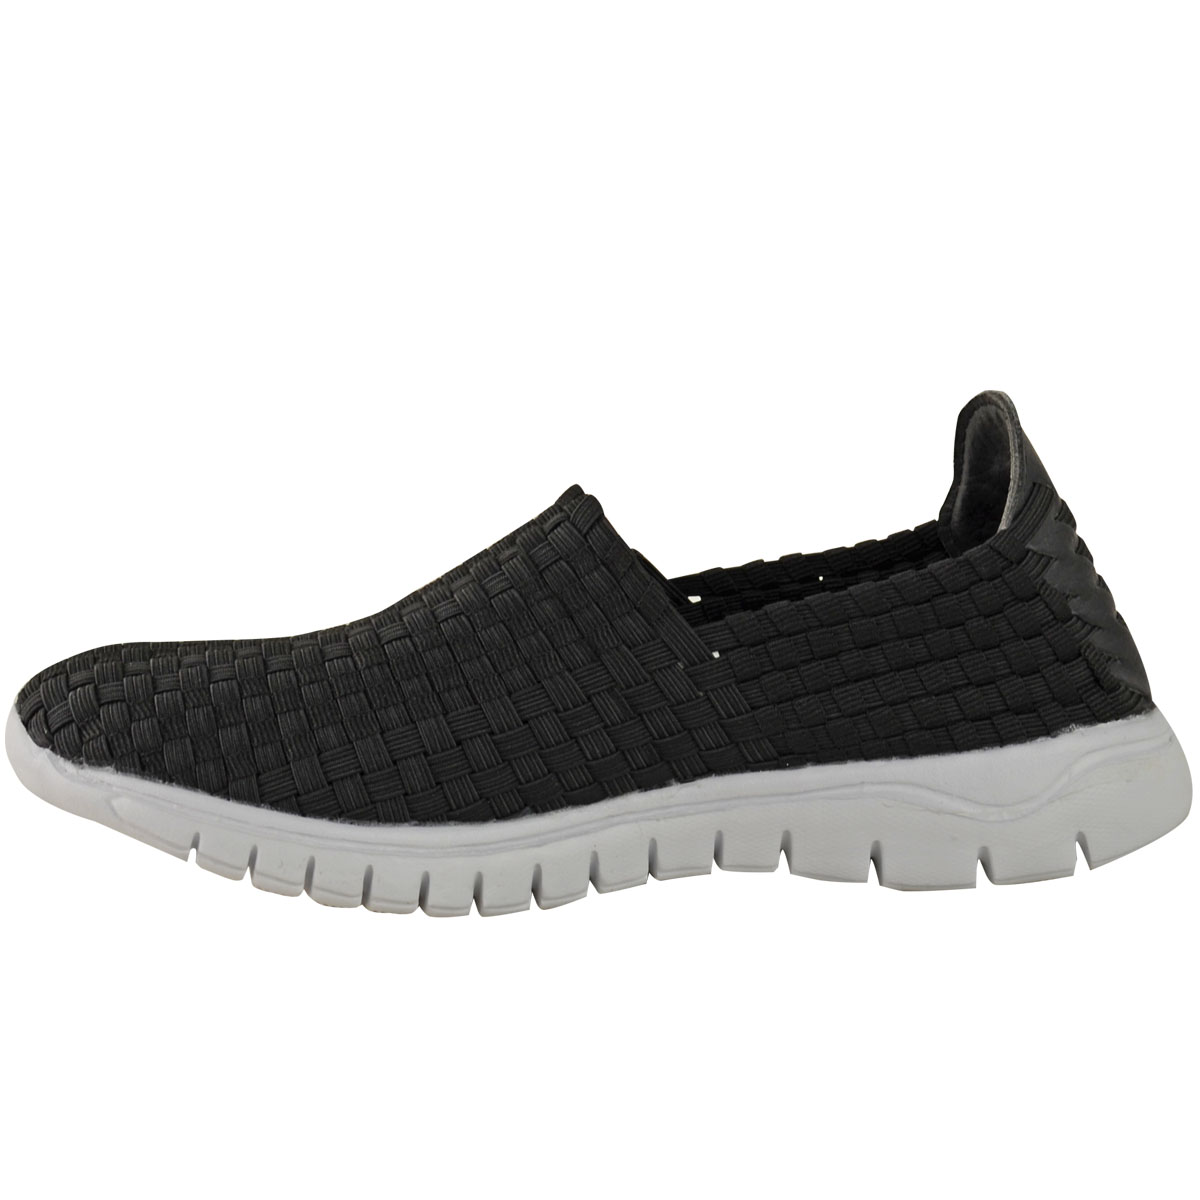 Ladies Womens Slip On Casual Walking Running Woven Gym Pumps Trainers Shoes Size